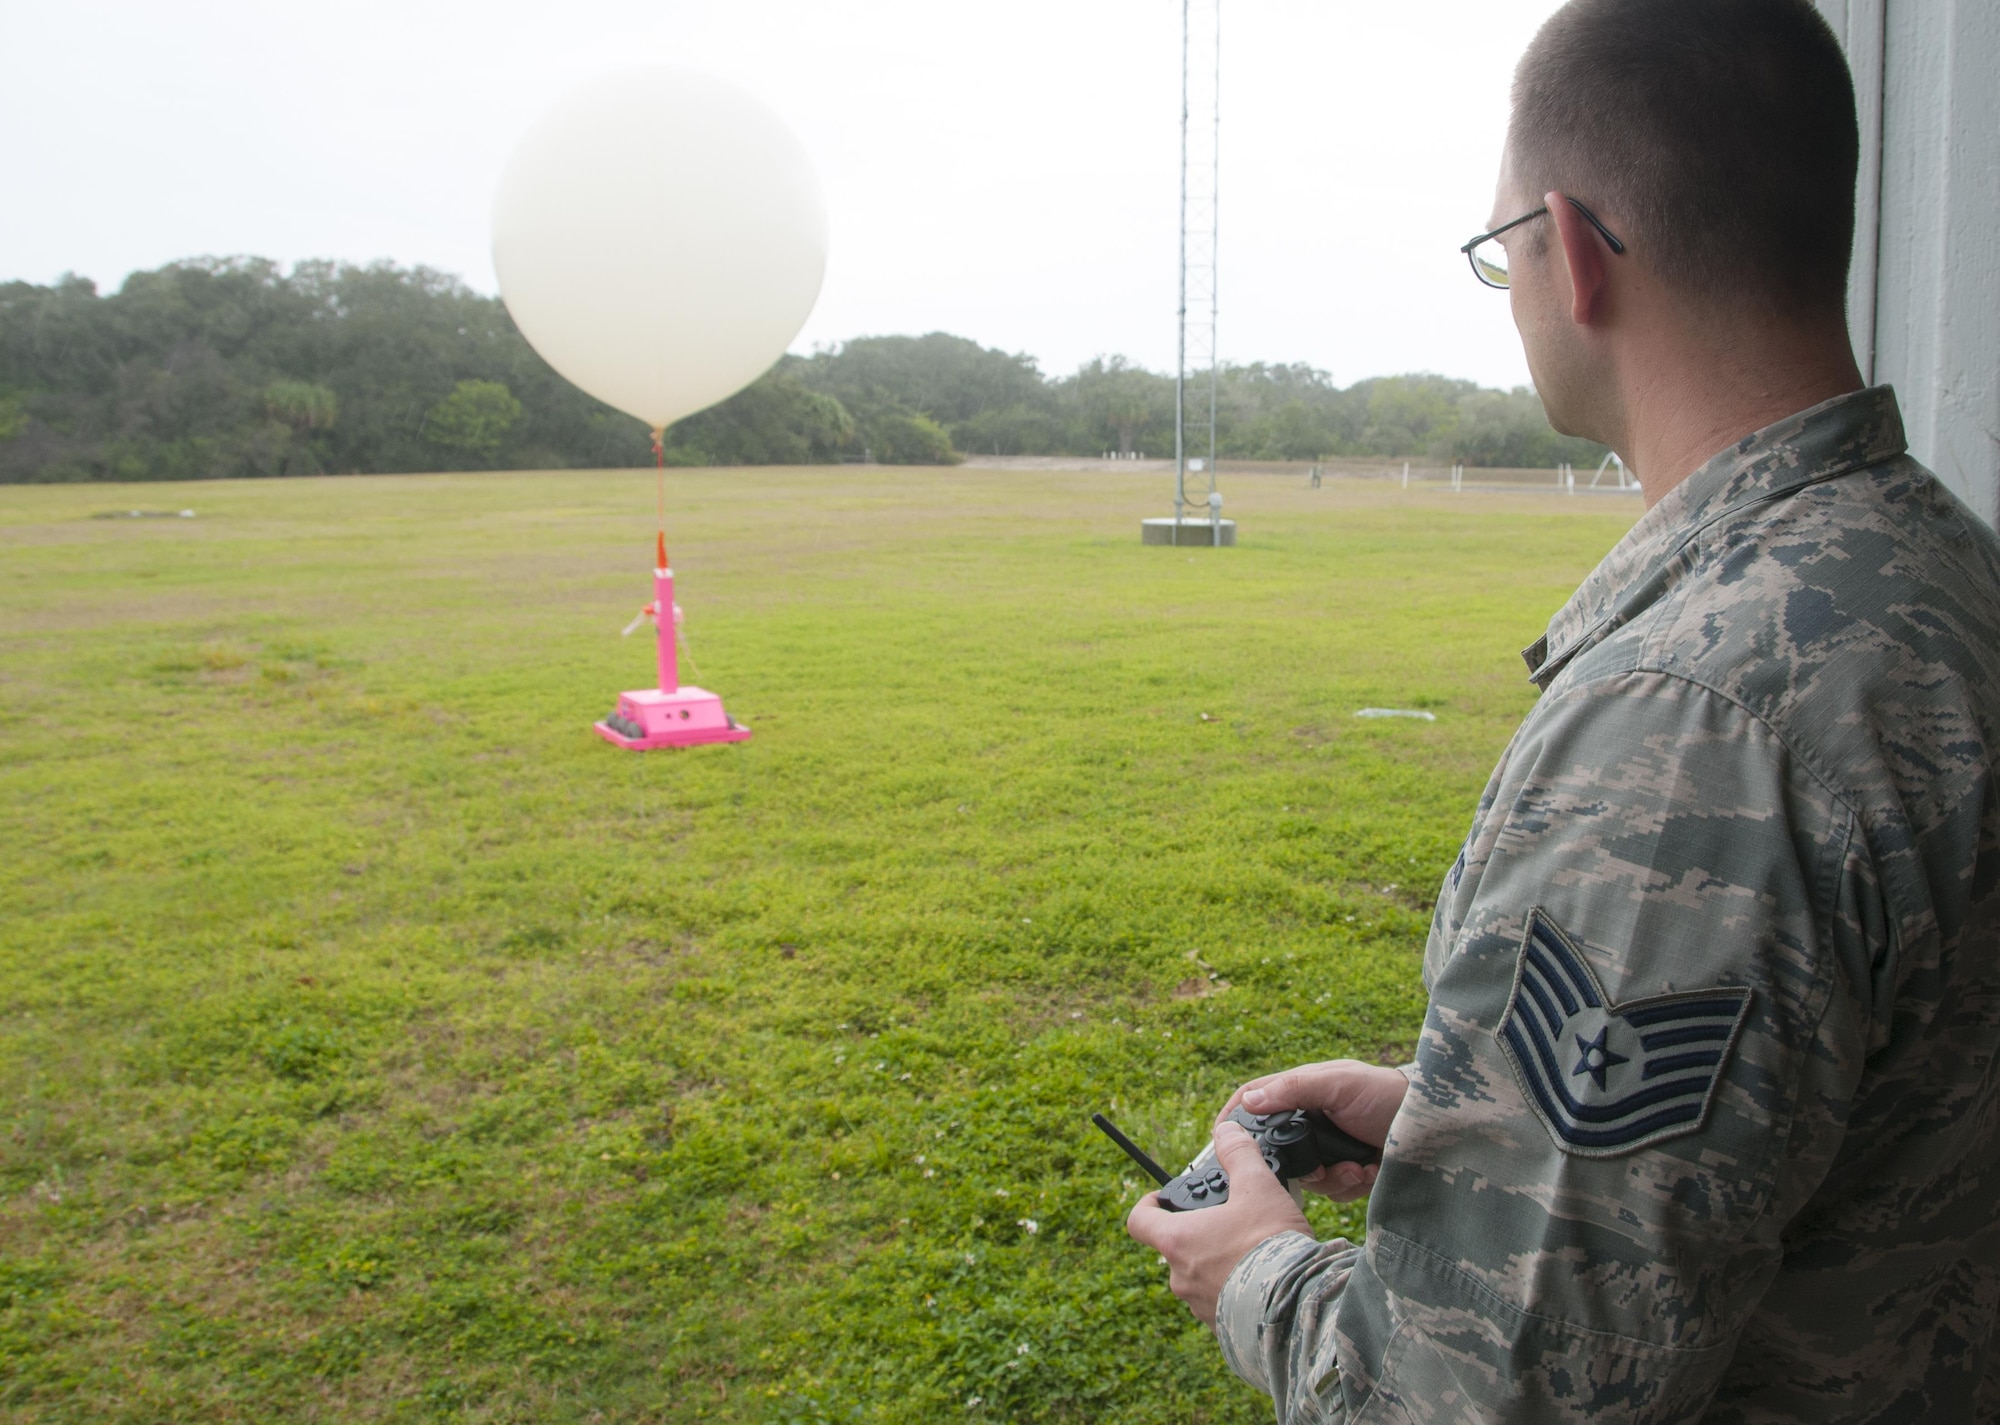 Tech Sgt. Matthew Mong, a 45th Weather Squadron range weather forecaster, demonstrates how to use a “weatherbot” at the weather balloon facility on Cape Canaveral Air Force Station, Fla., Feb. 24, 2016. The remote-controlled robot releases balloons when lightning is present so forecasters can stay safely indoors. Data from the balloons, particularly wind speed and direction, help Airmen and mission partners decide either to launch or postpone a space mission. (U.S. Air Force photo/Sean Kimmons)